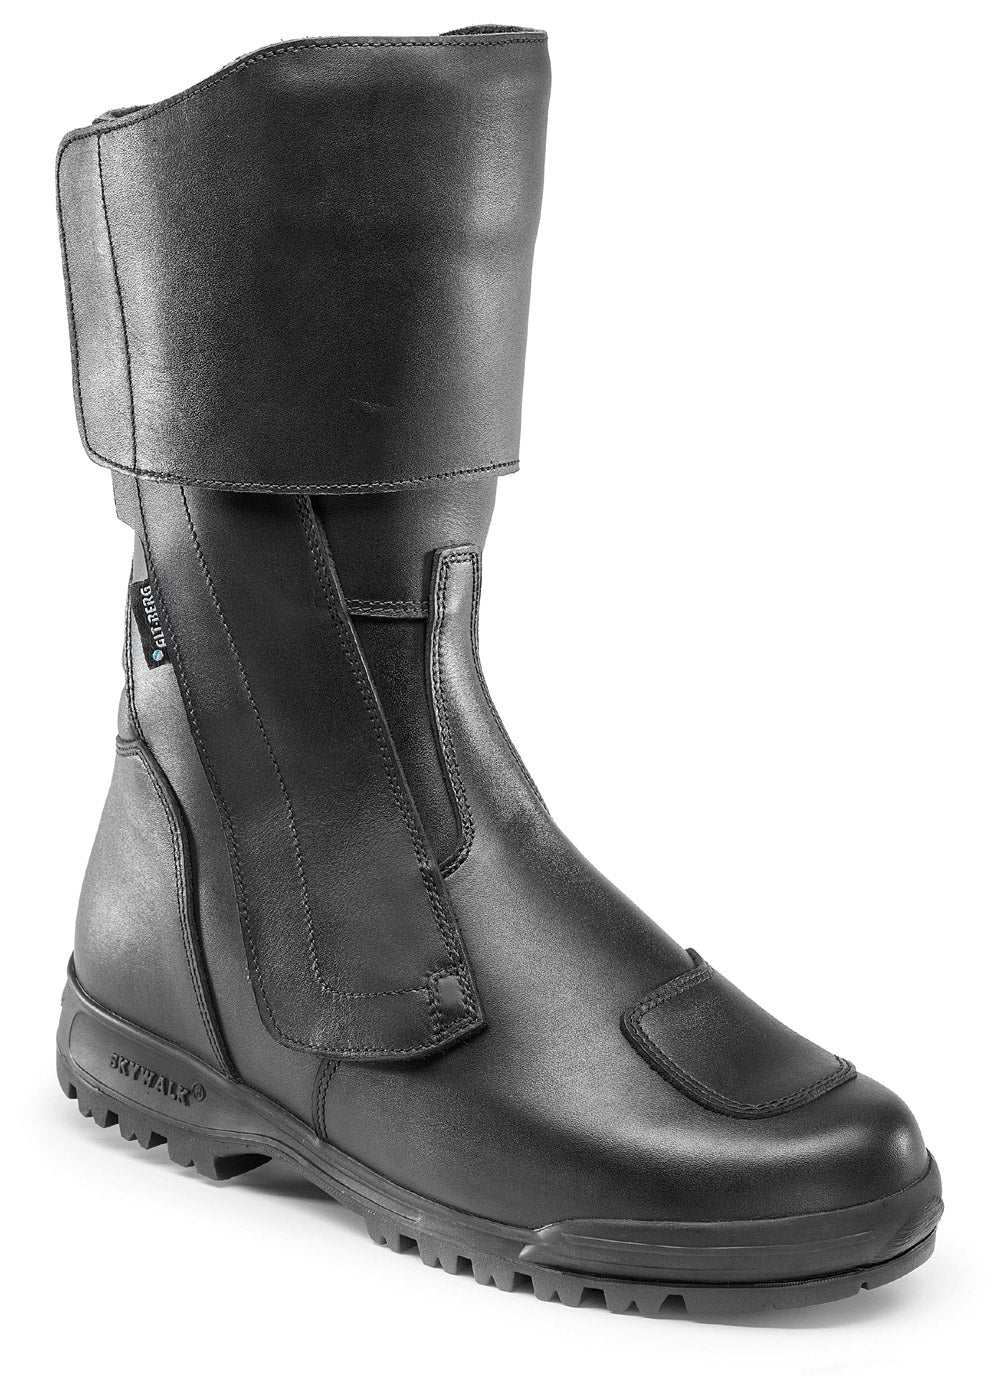 ALTBERG CLUBMAN ROADSTER BOOTS